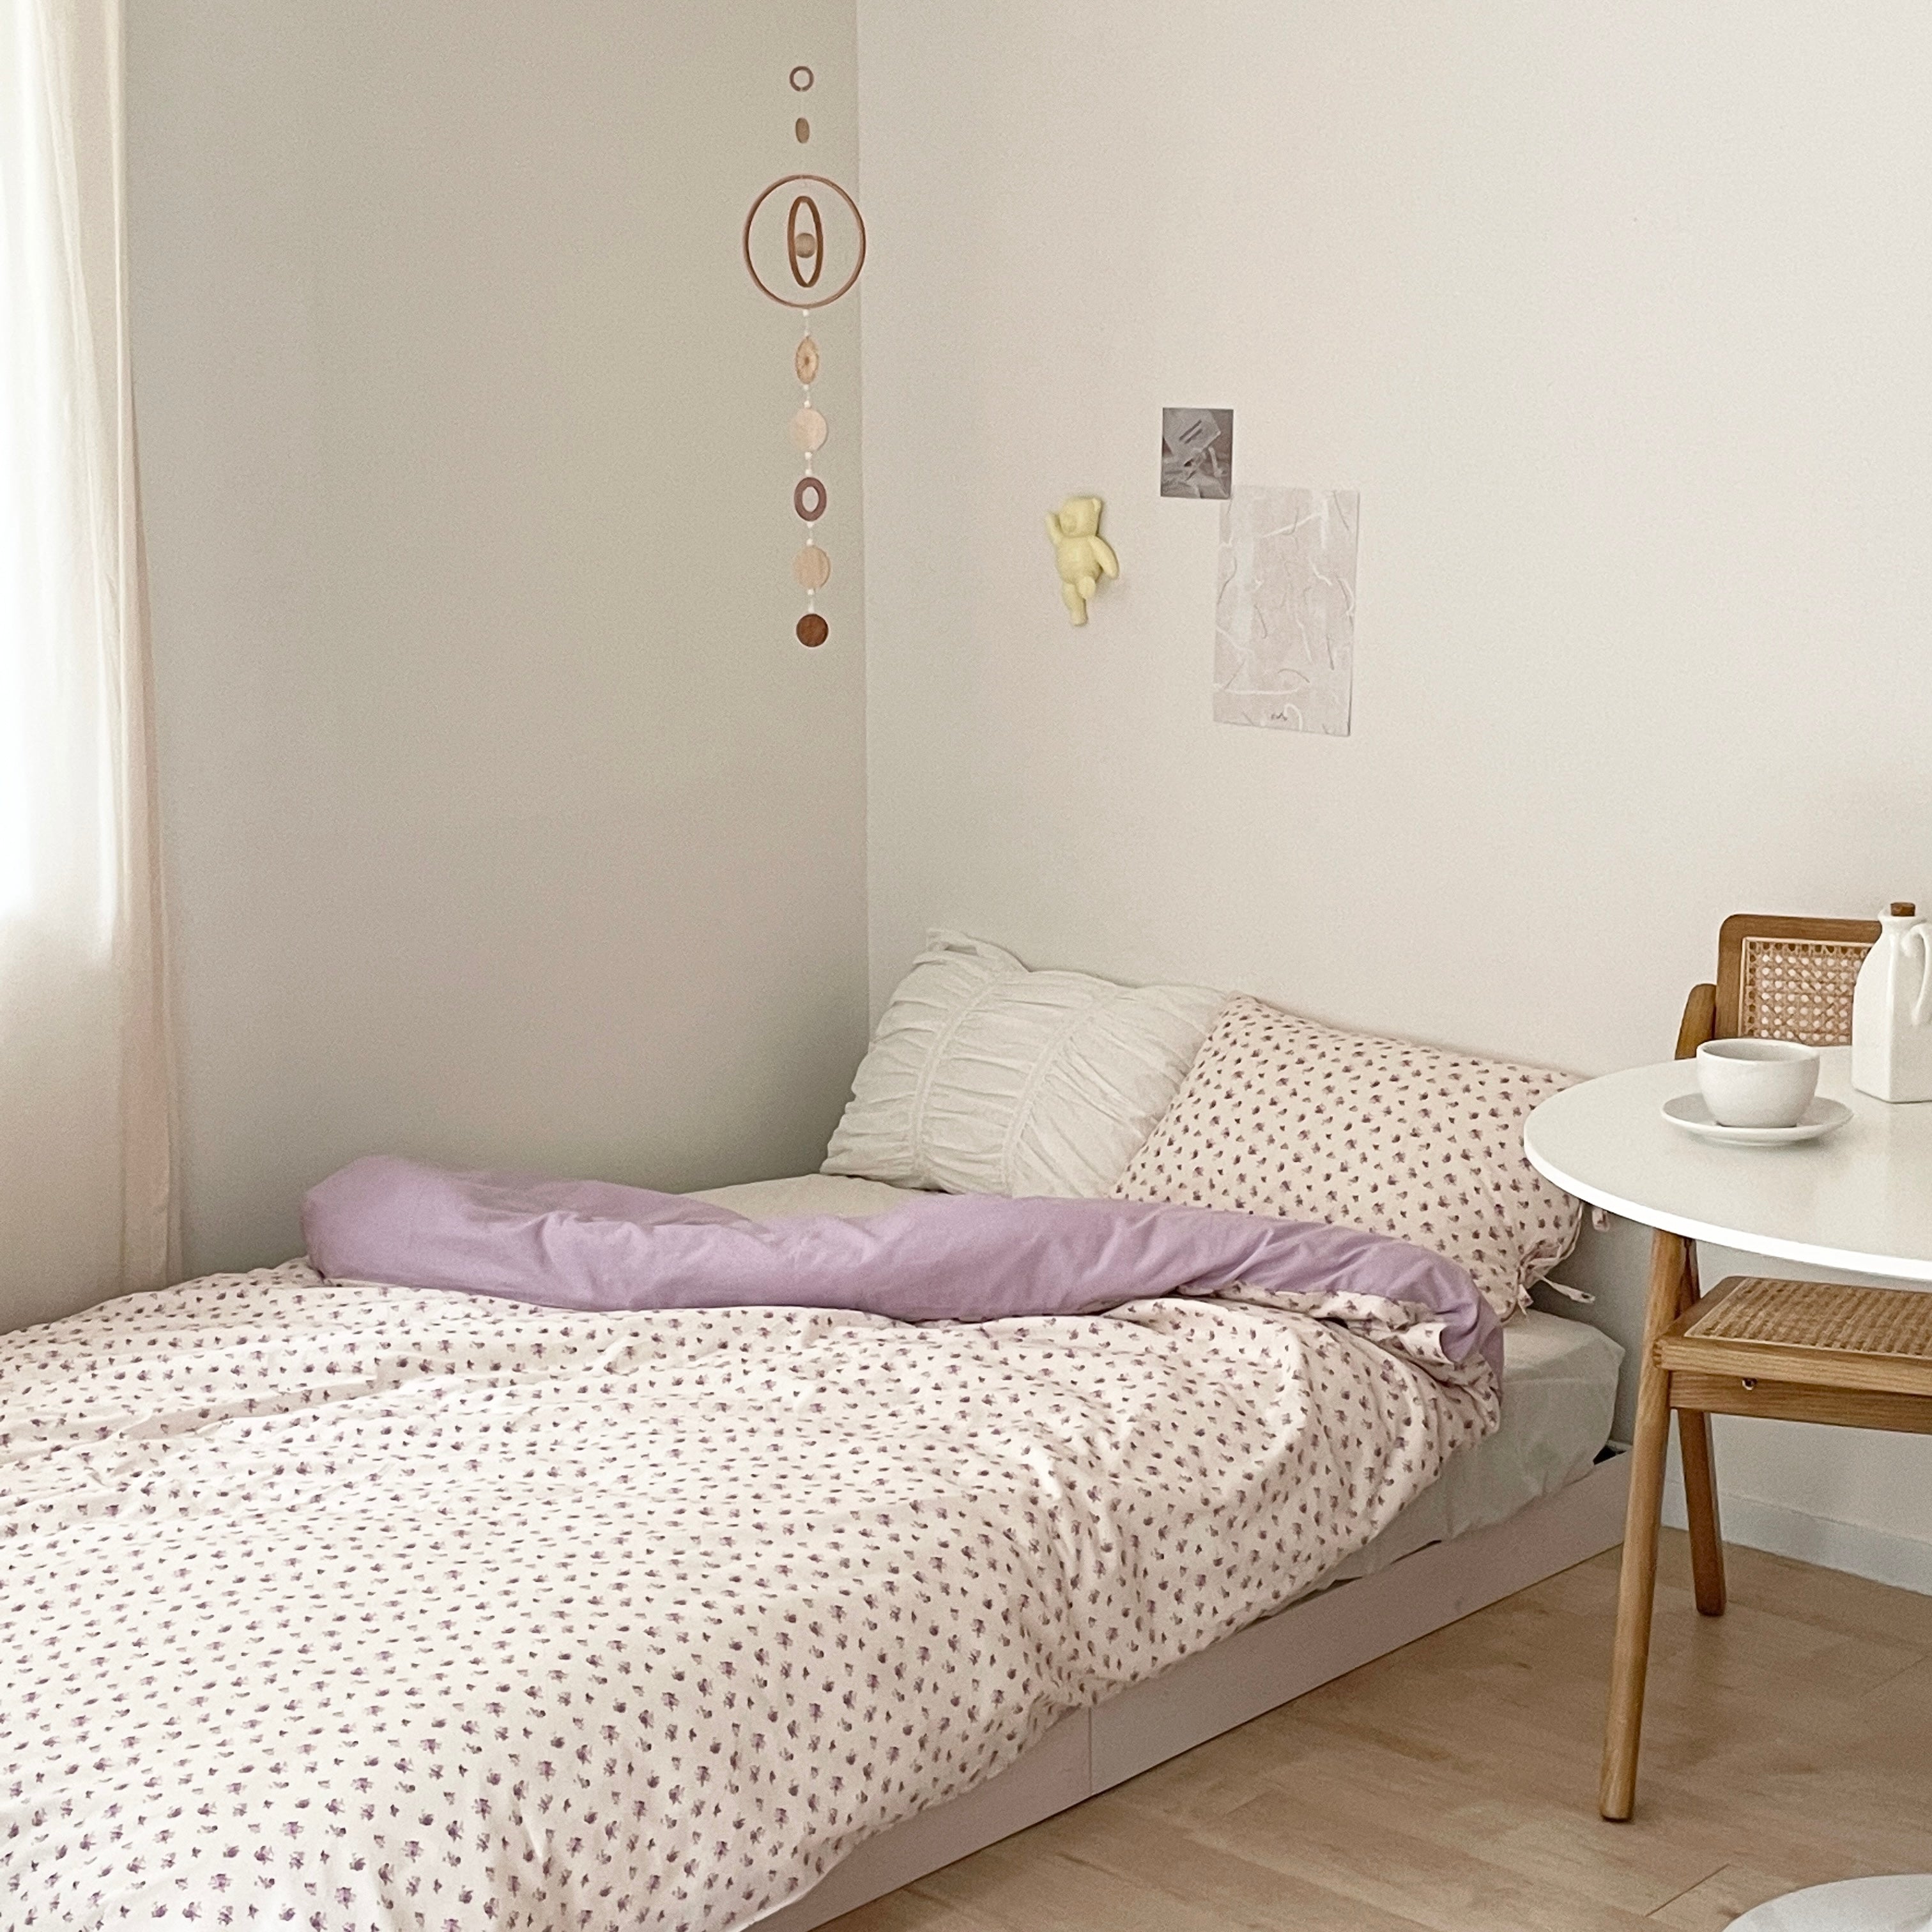 OR-2226-Little Rooms-リバーシブル布団カバー｜rose duvet cover